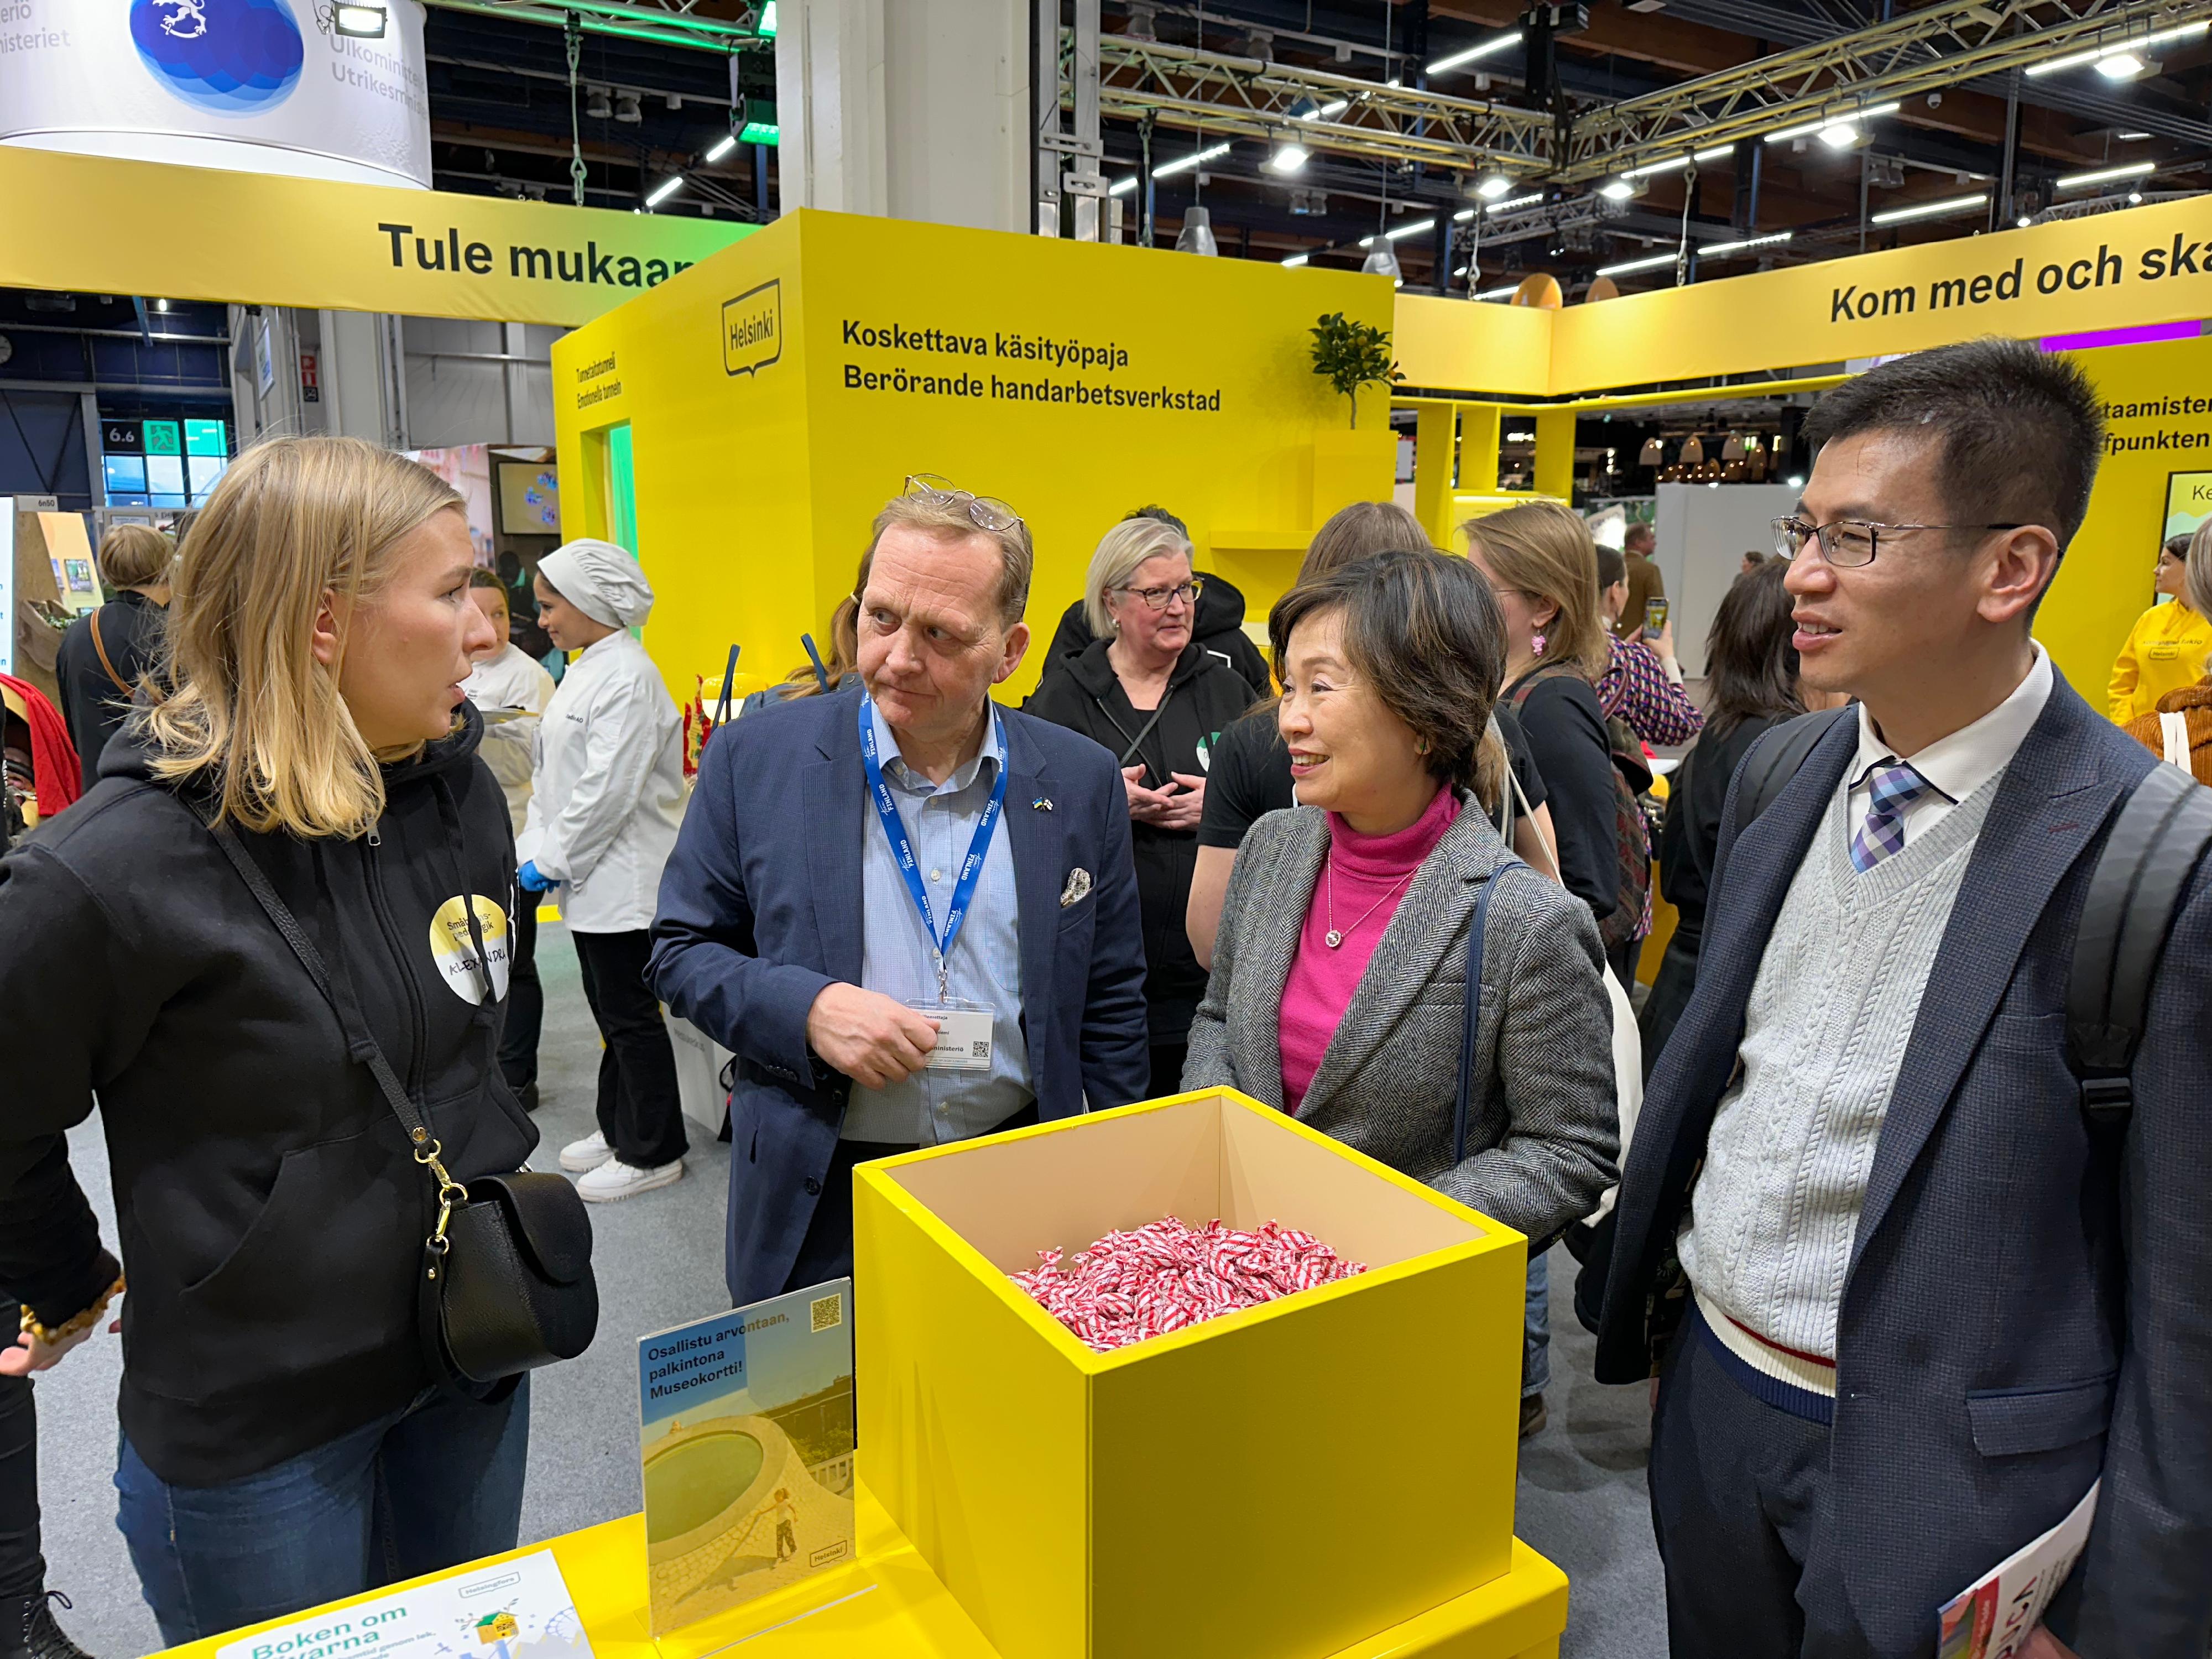 The Secretary for Education, Dr Choi Yuk-lin (second right), and the Director-General of the Hong Kong Economic and Trade Office, London, Mr Gilford Law (first right), toured the Educa, an education exhibition, in Helsinki, Finland, on January 26 (Helsinki time).